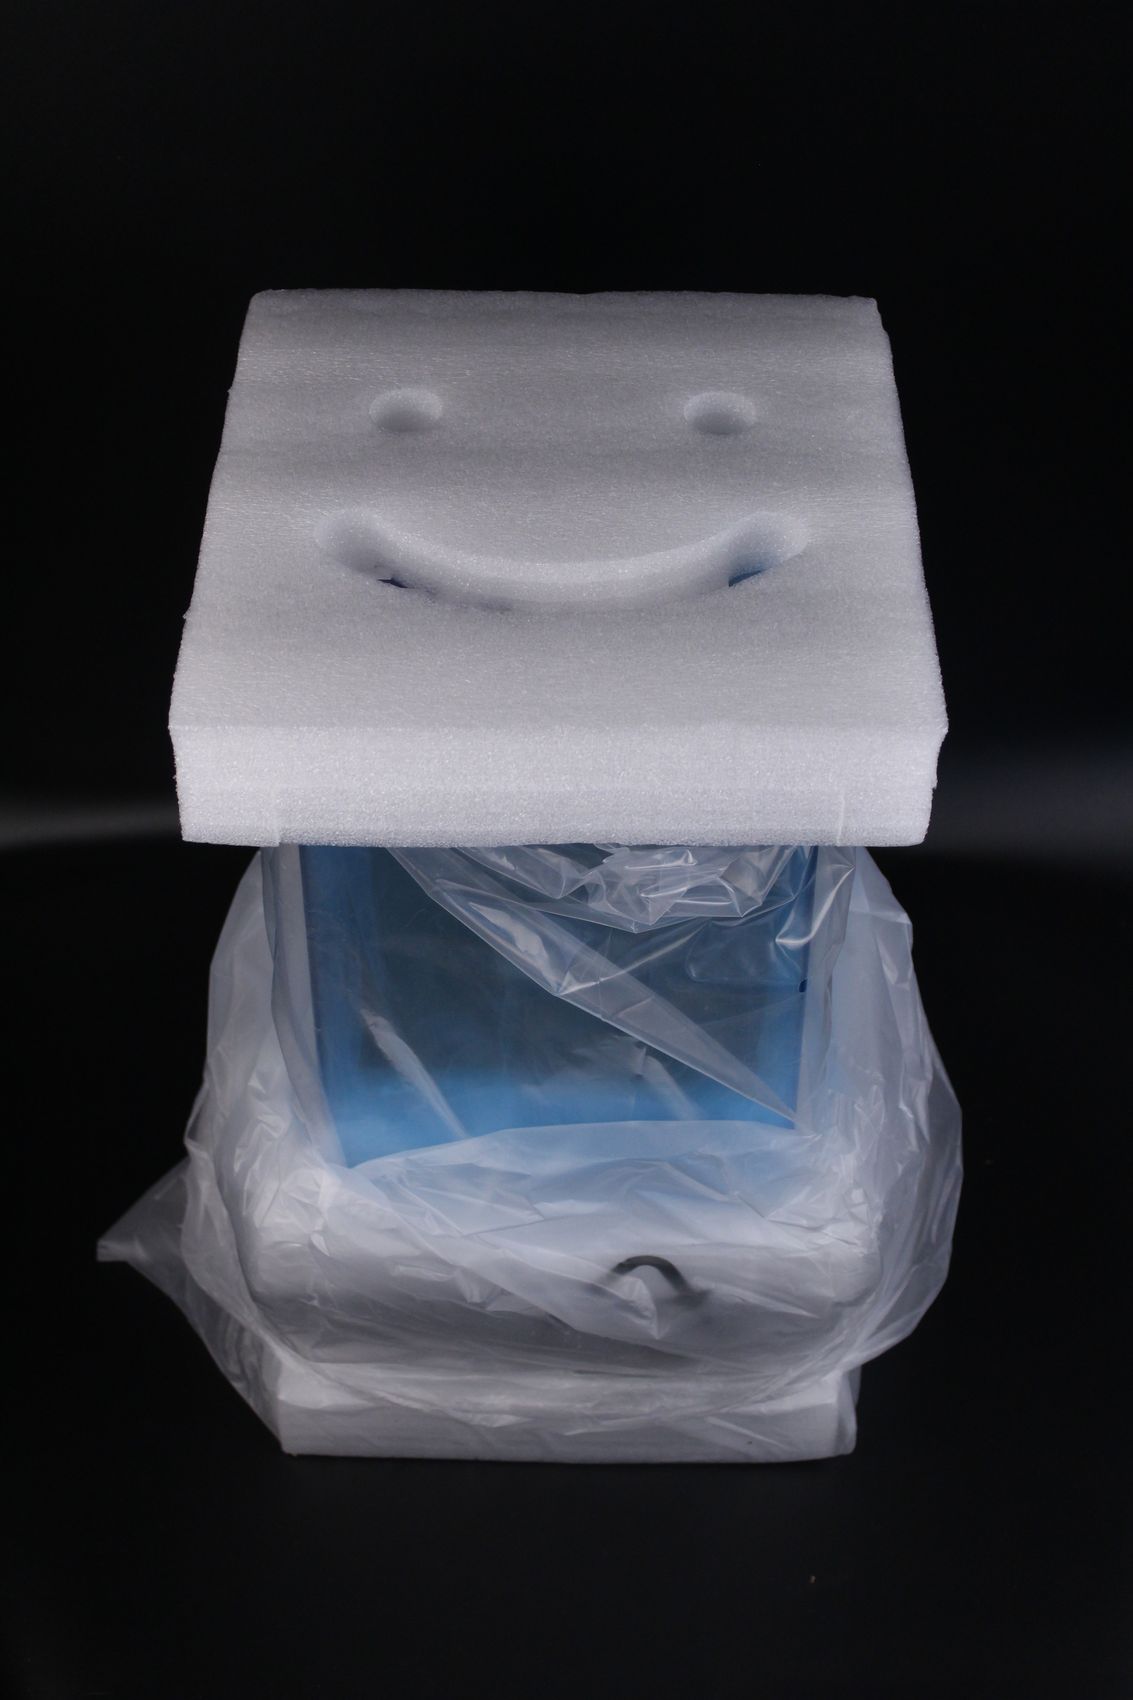 Anycubic Photon D2 Packaging2 | Anycubic Photon D2 Review: DLP Resin 3D Printer